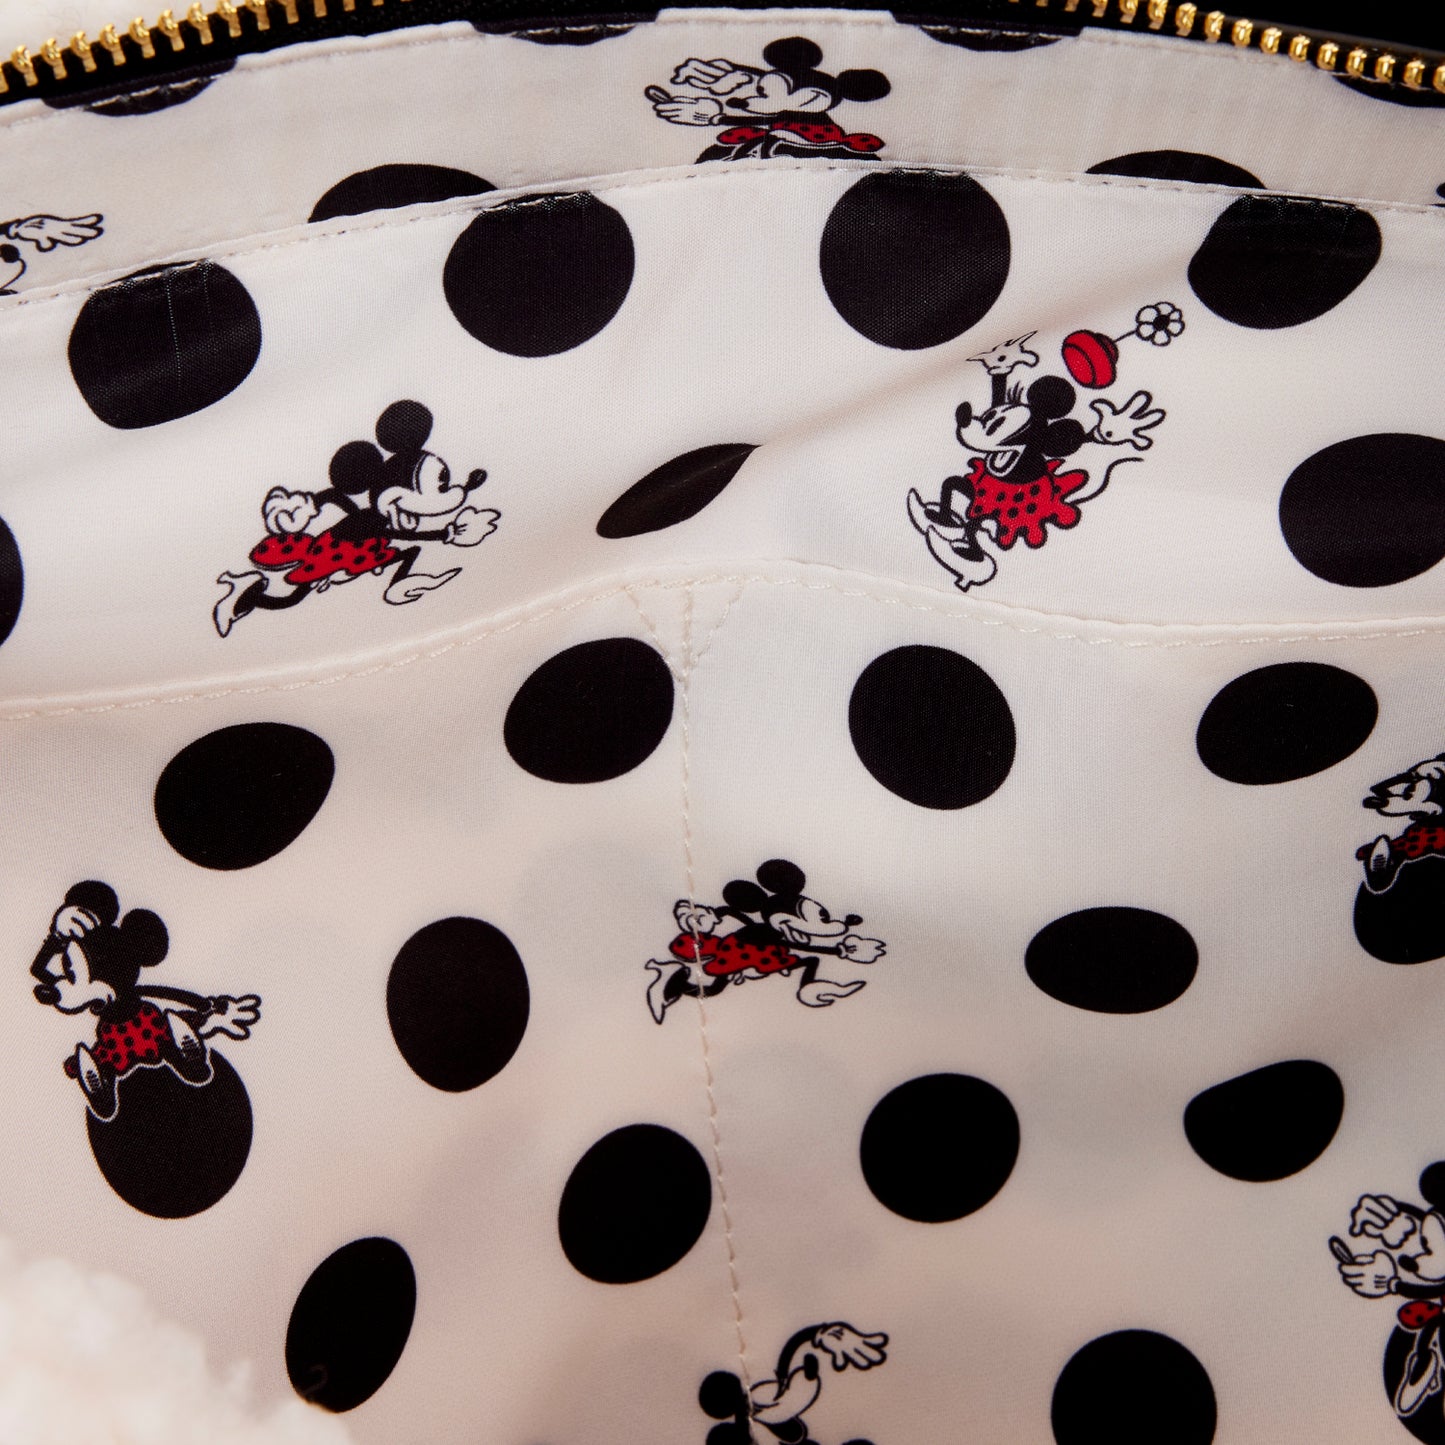 Minnie Mouse Rocks the Dots Classic Sherpa Tote Bag LFY